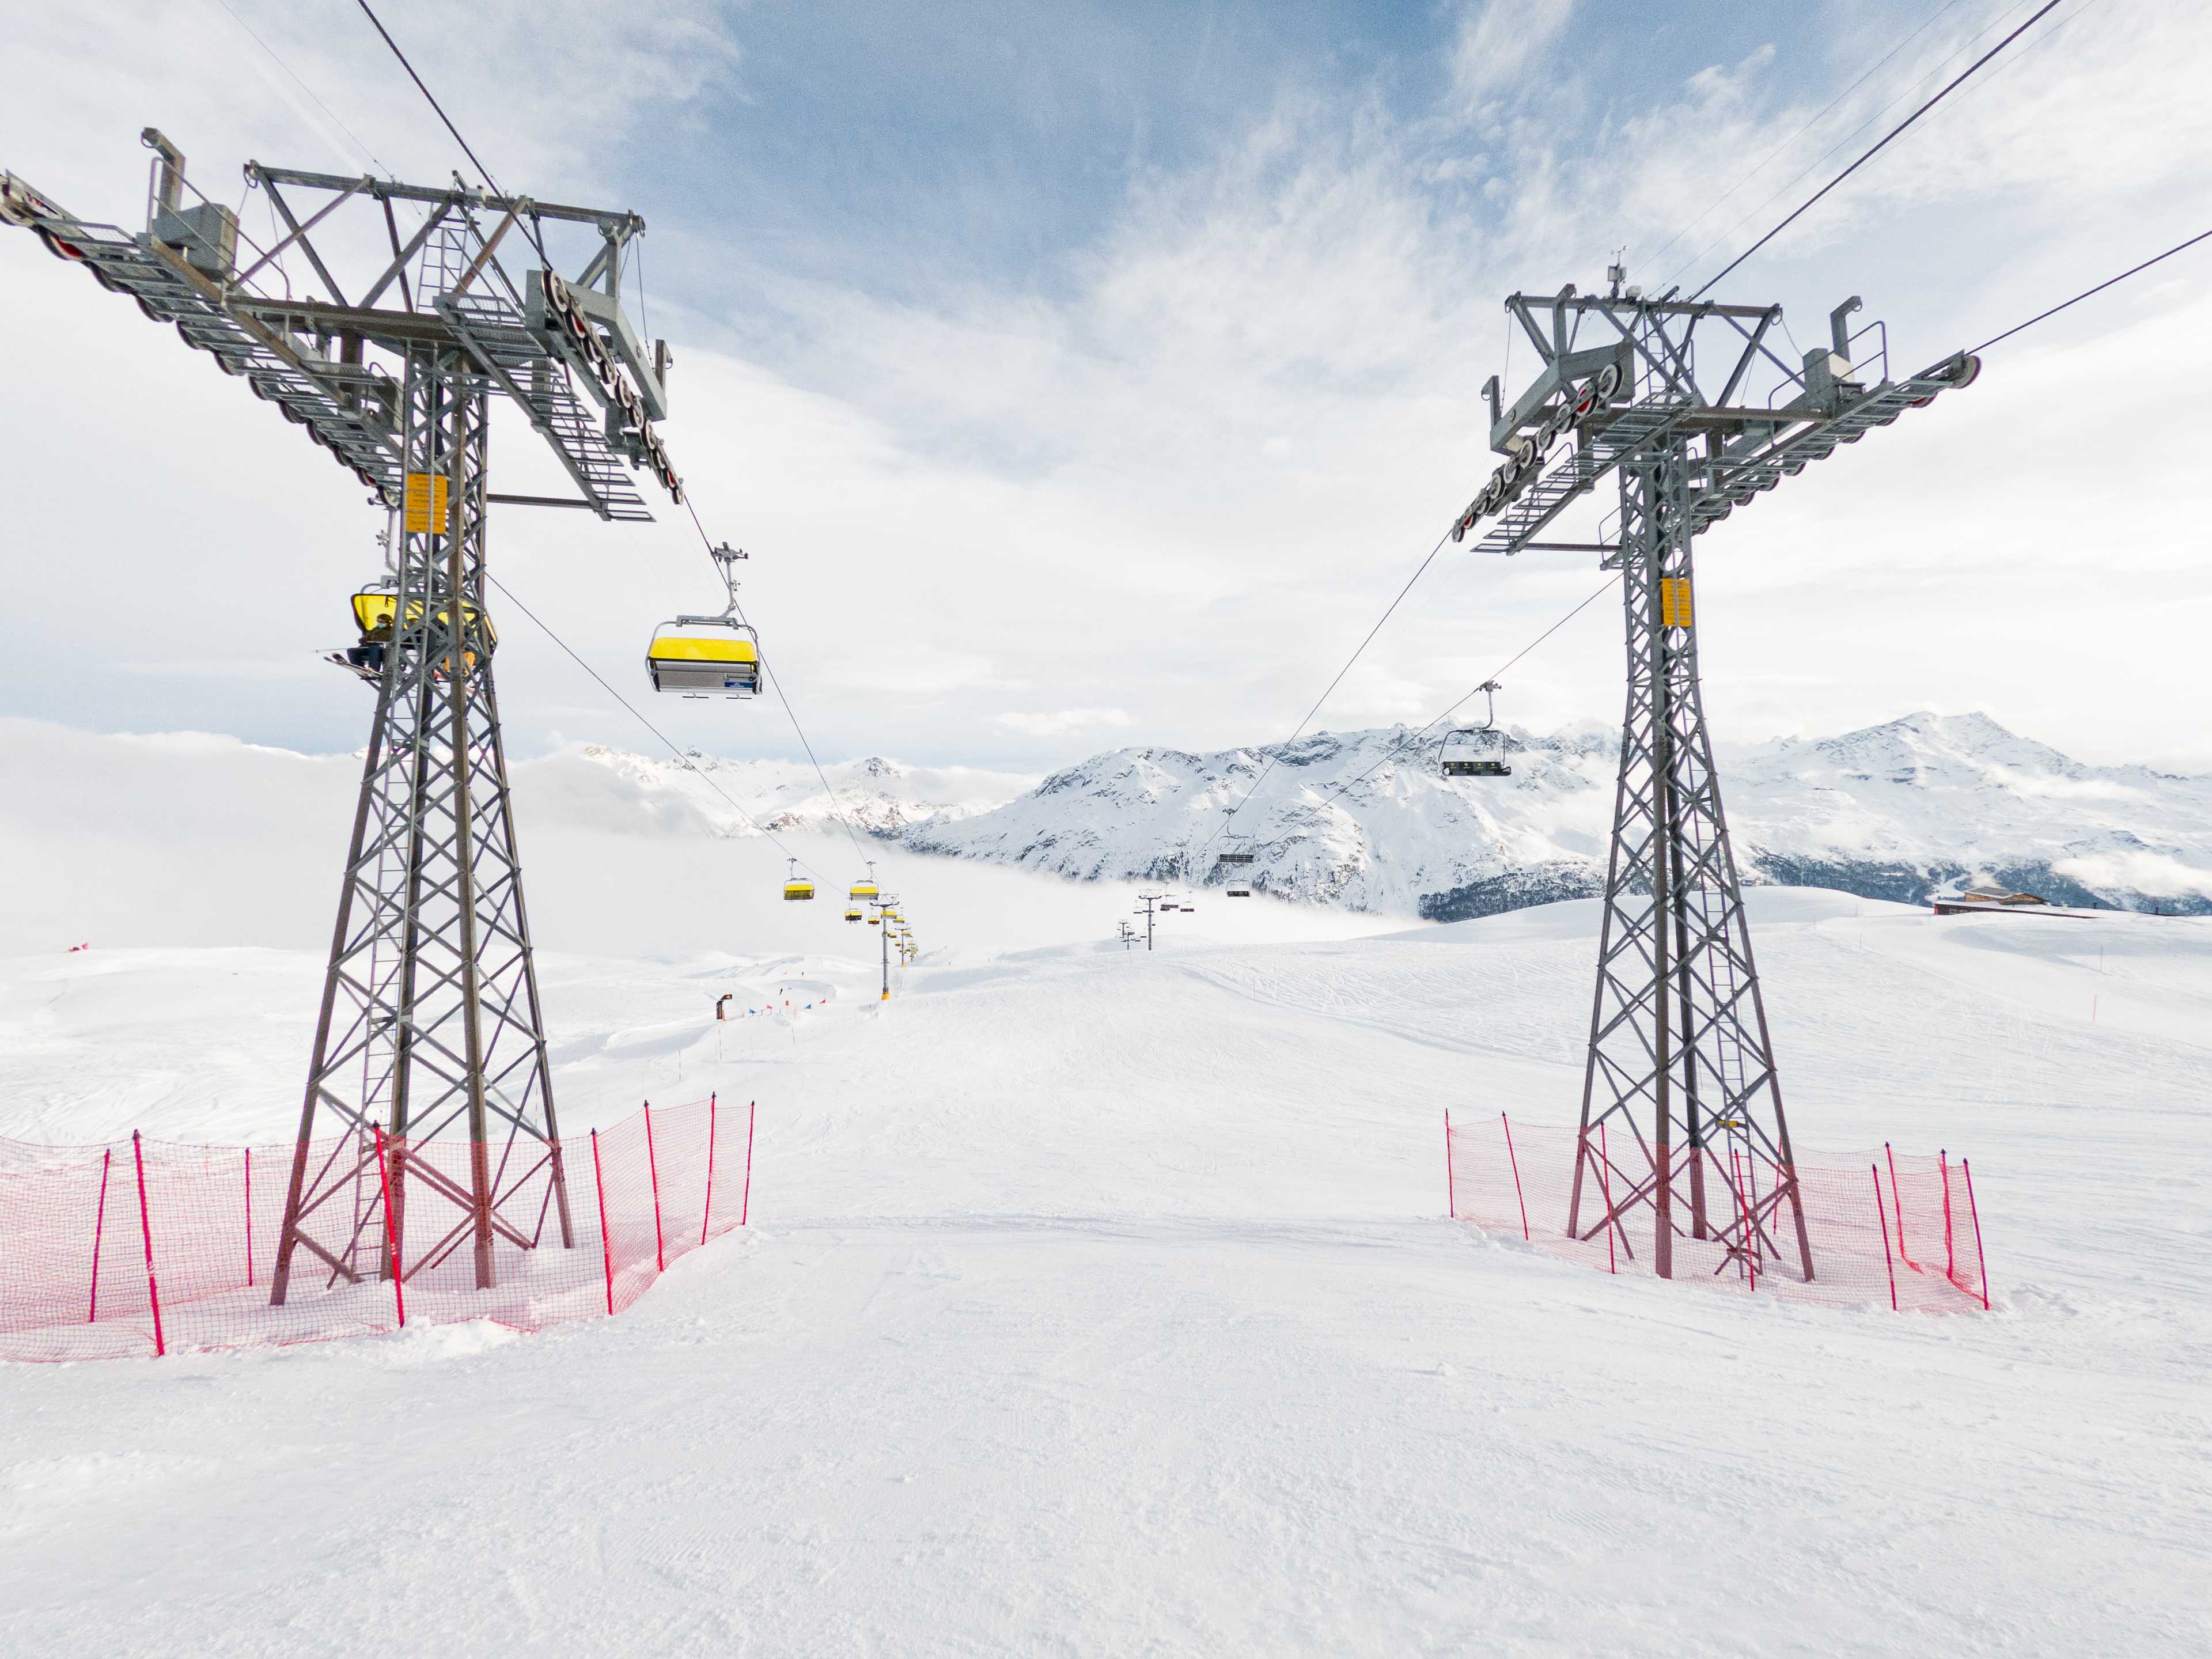 Alp Giop and Salastrains chairlifts, Corviglia, St. Moritz